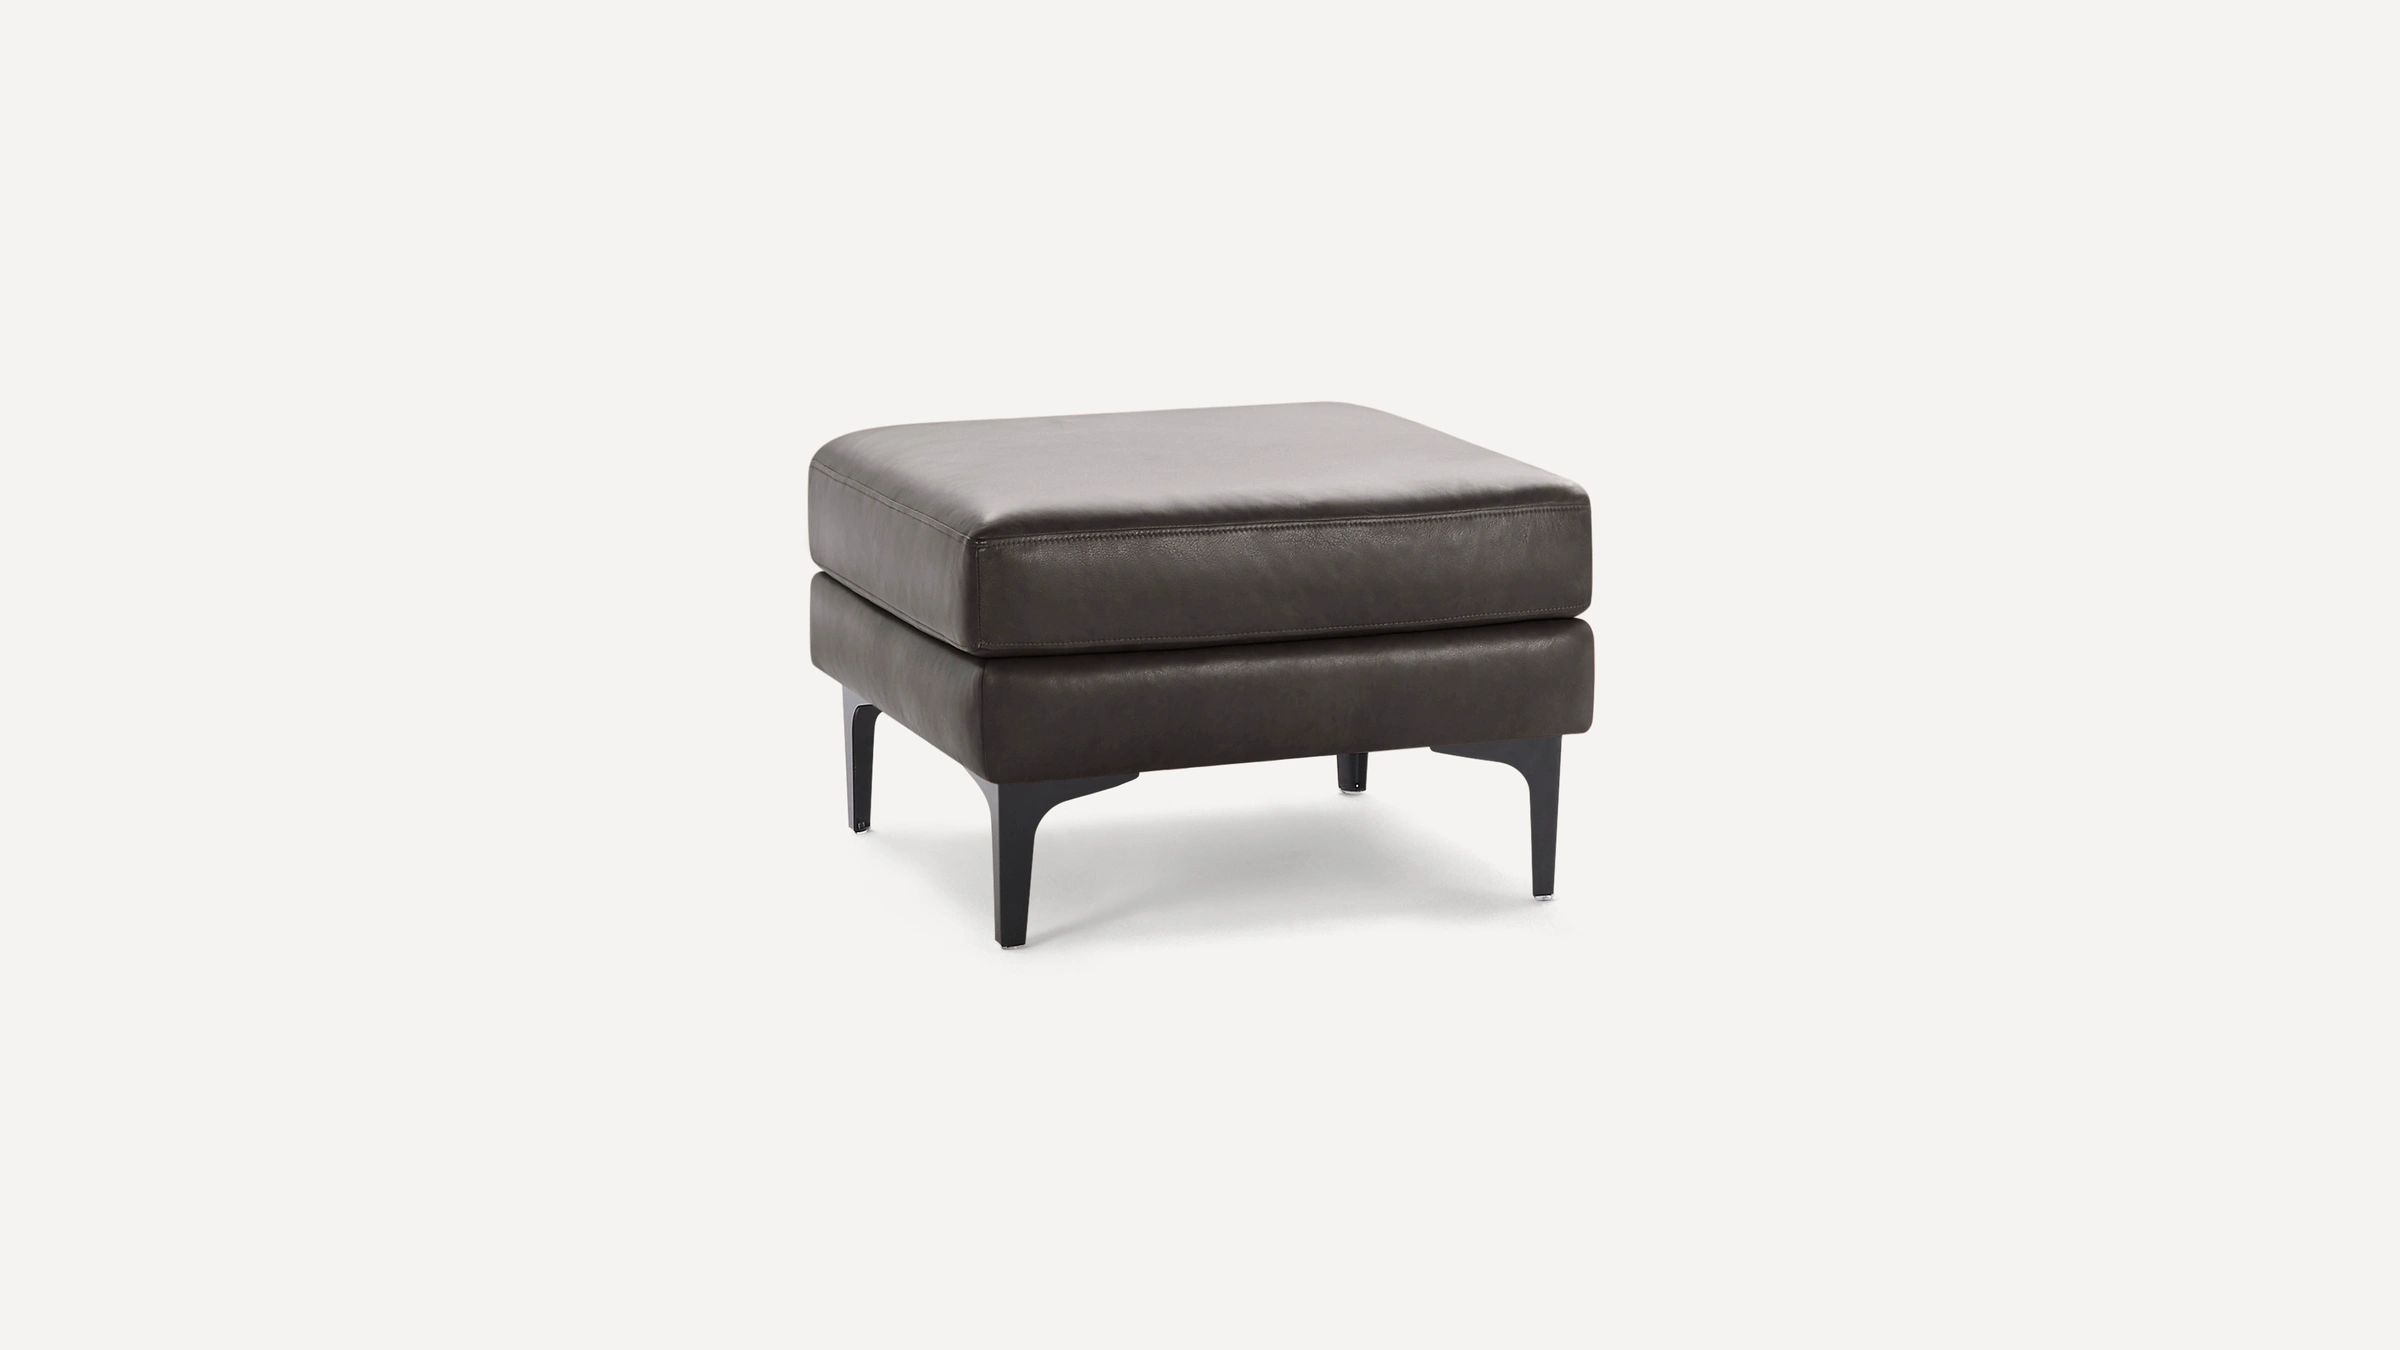 The Nomad Leather Ottoman Modern, Modern Leather Ottoman